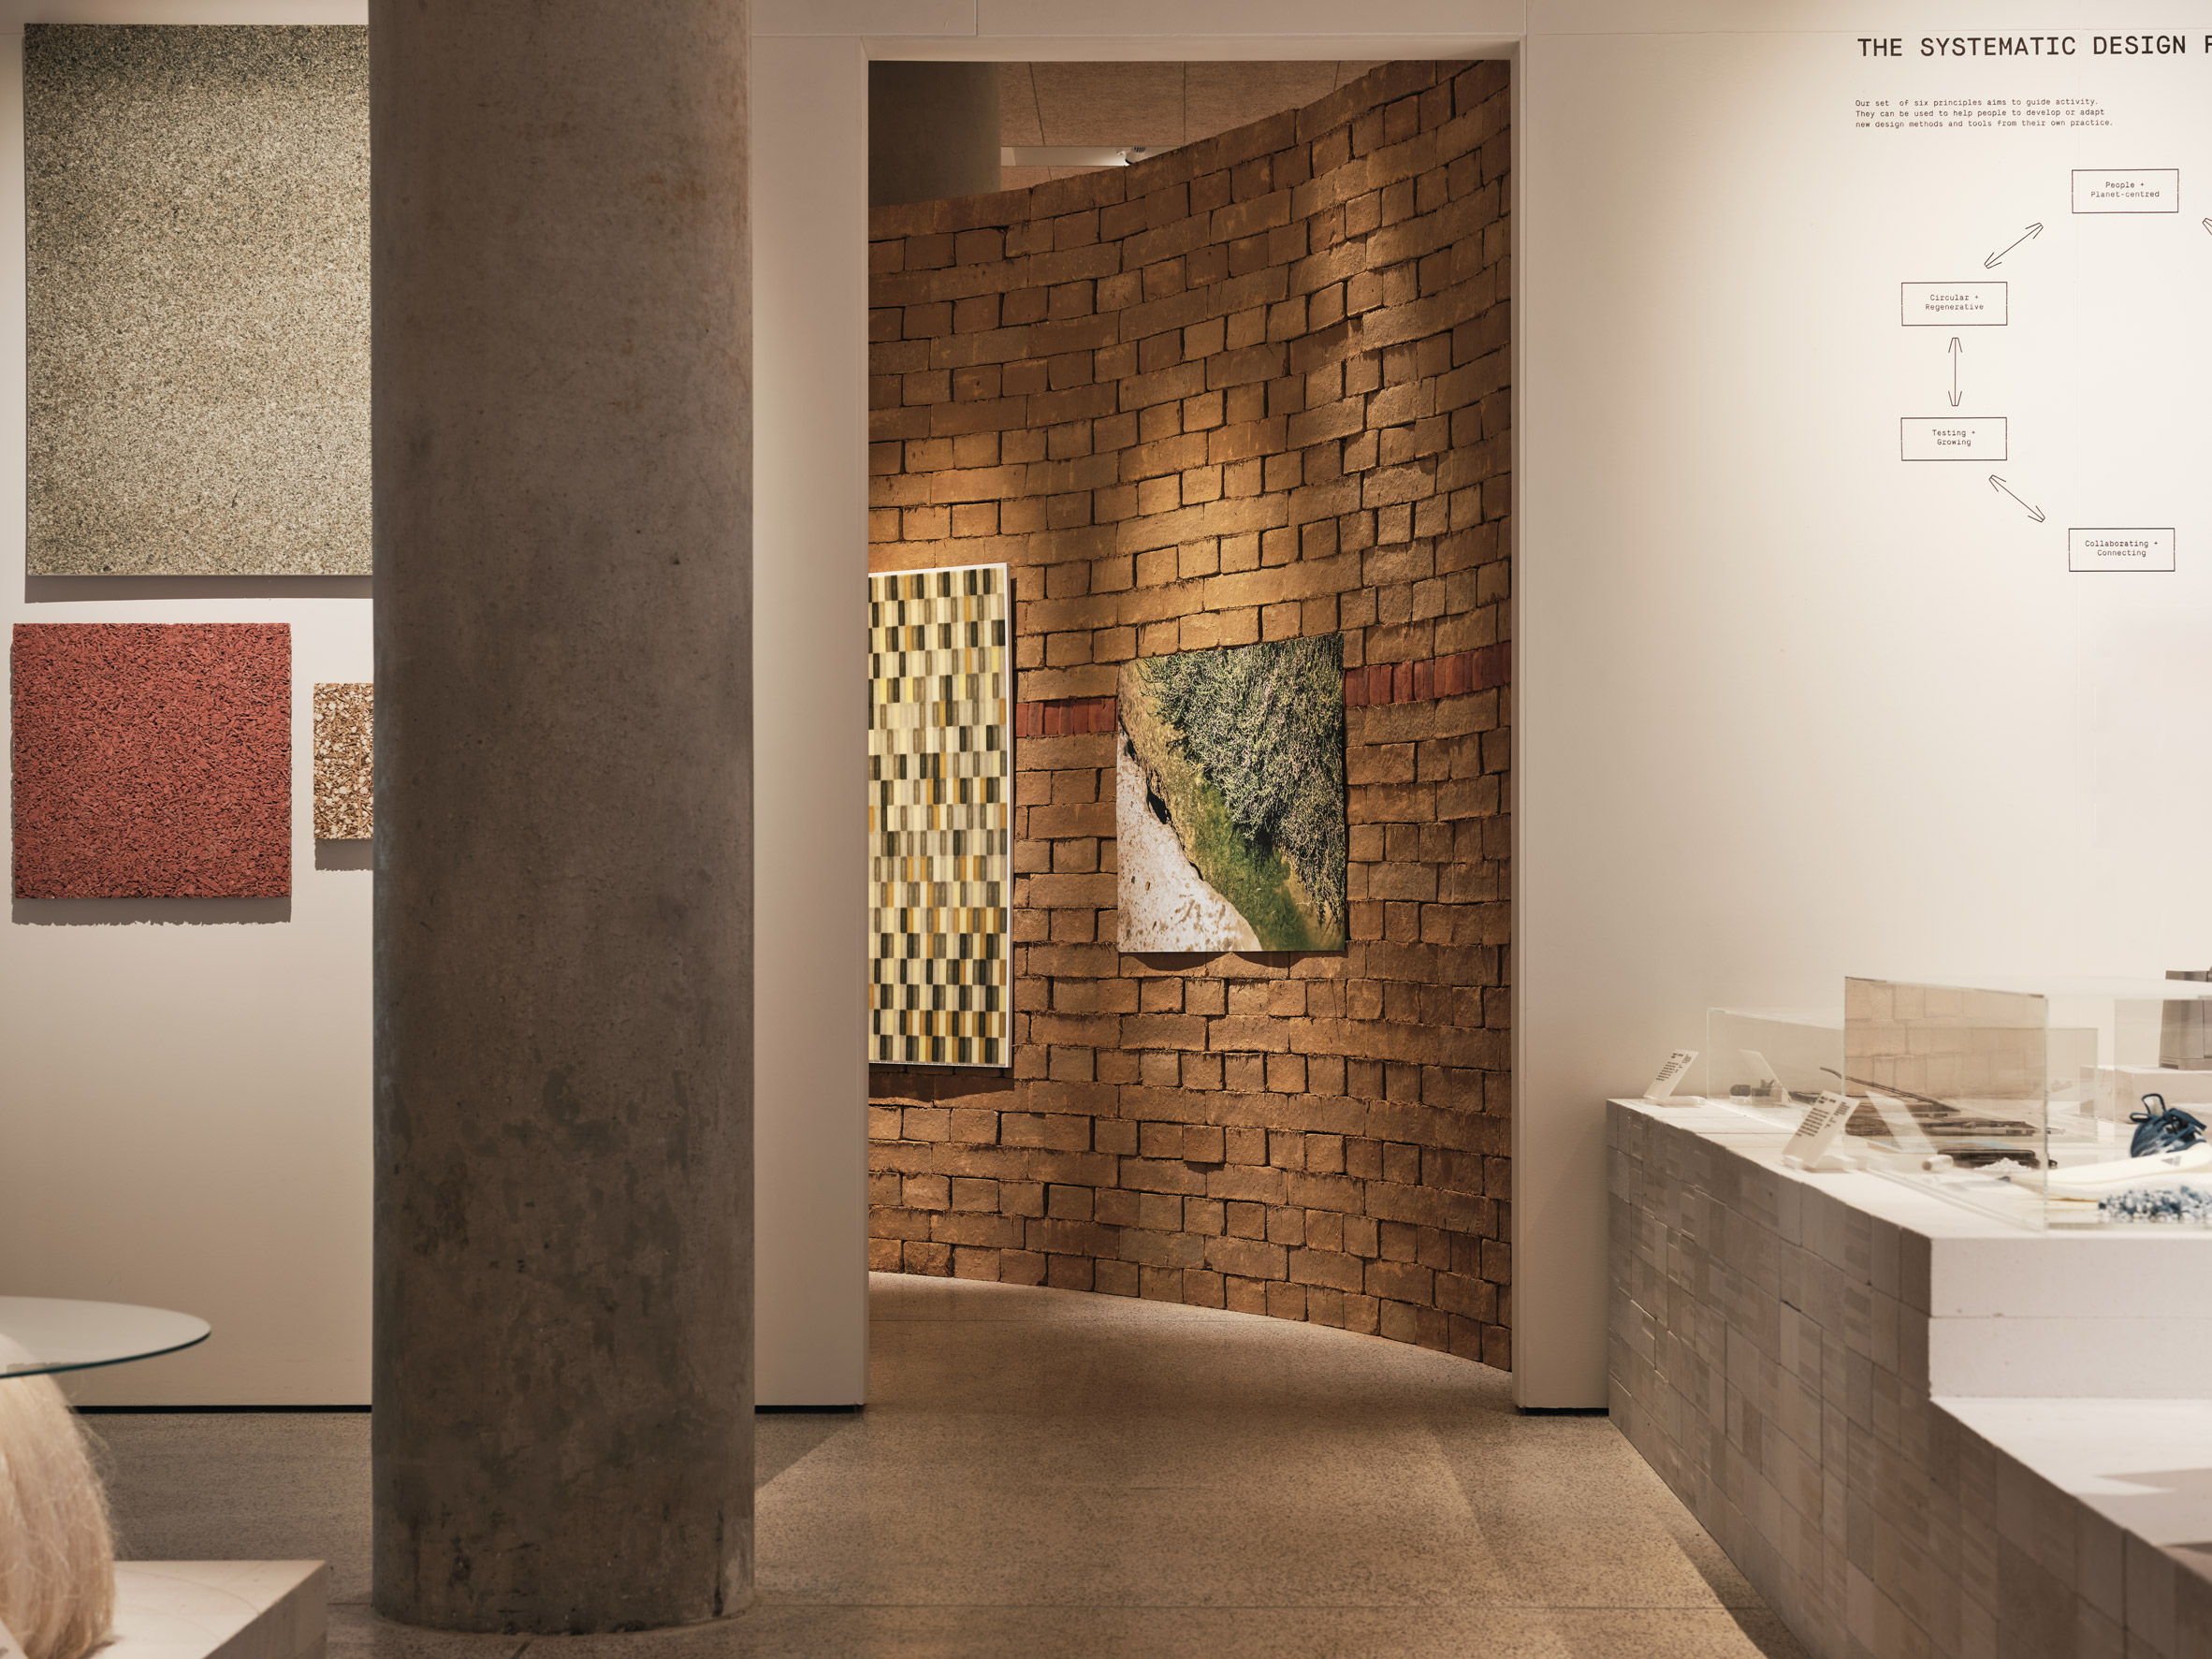 Waste Age exhibition design by Material Cultures with unfired bricks